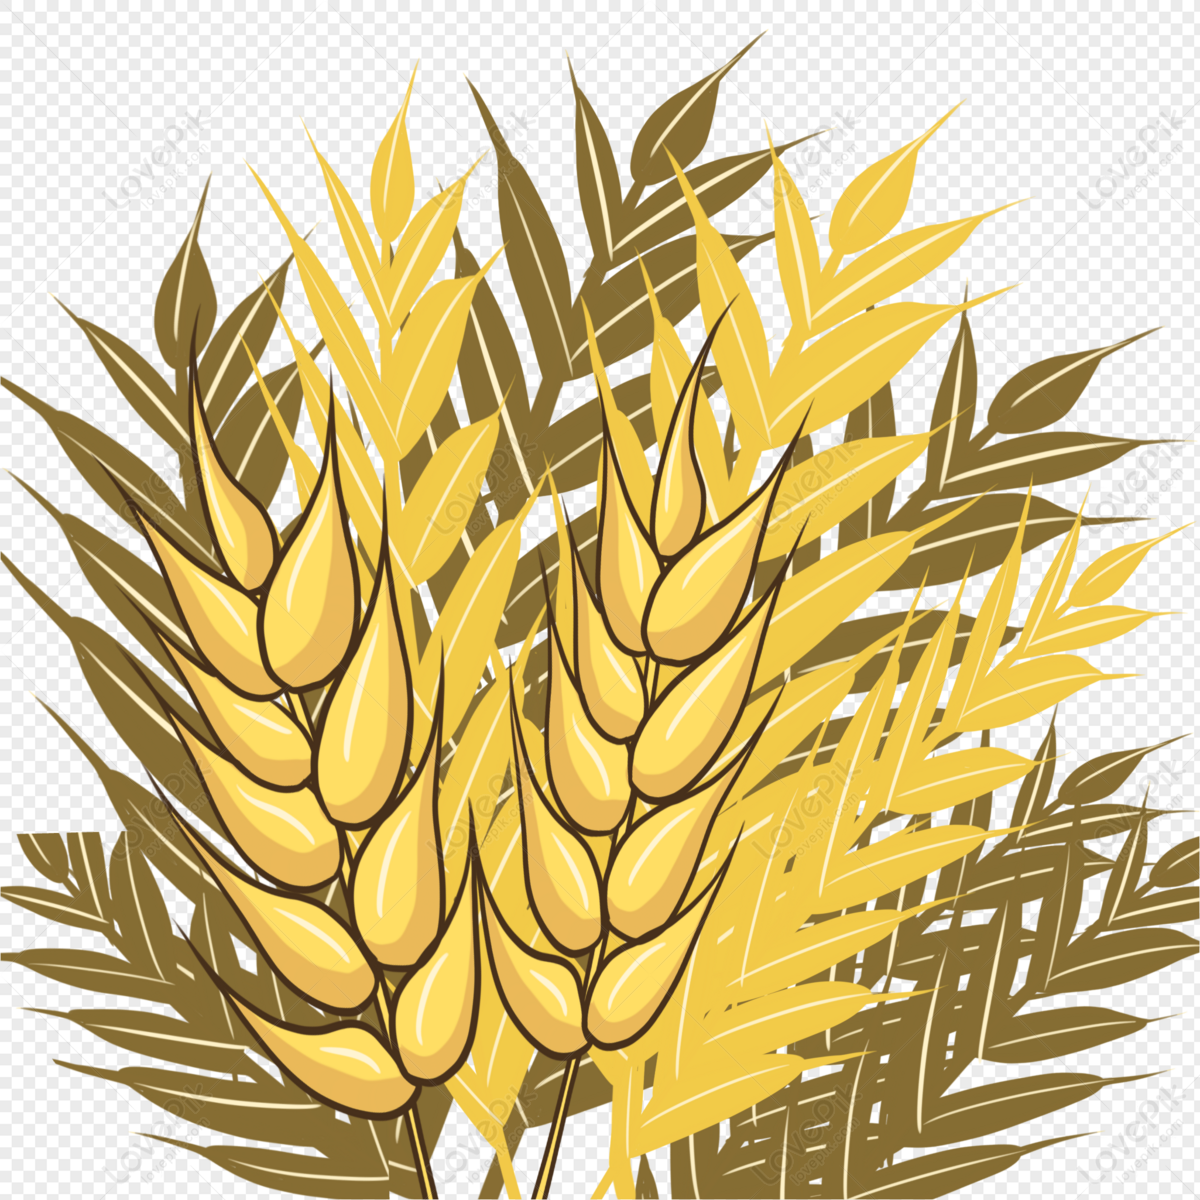 Cartoon Hand Drawn Crops Harvest Granules Full Of Wheat PNG White  Transparent And Clipart Image For Free Download - Lovepik | 401397022